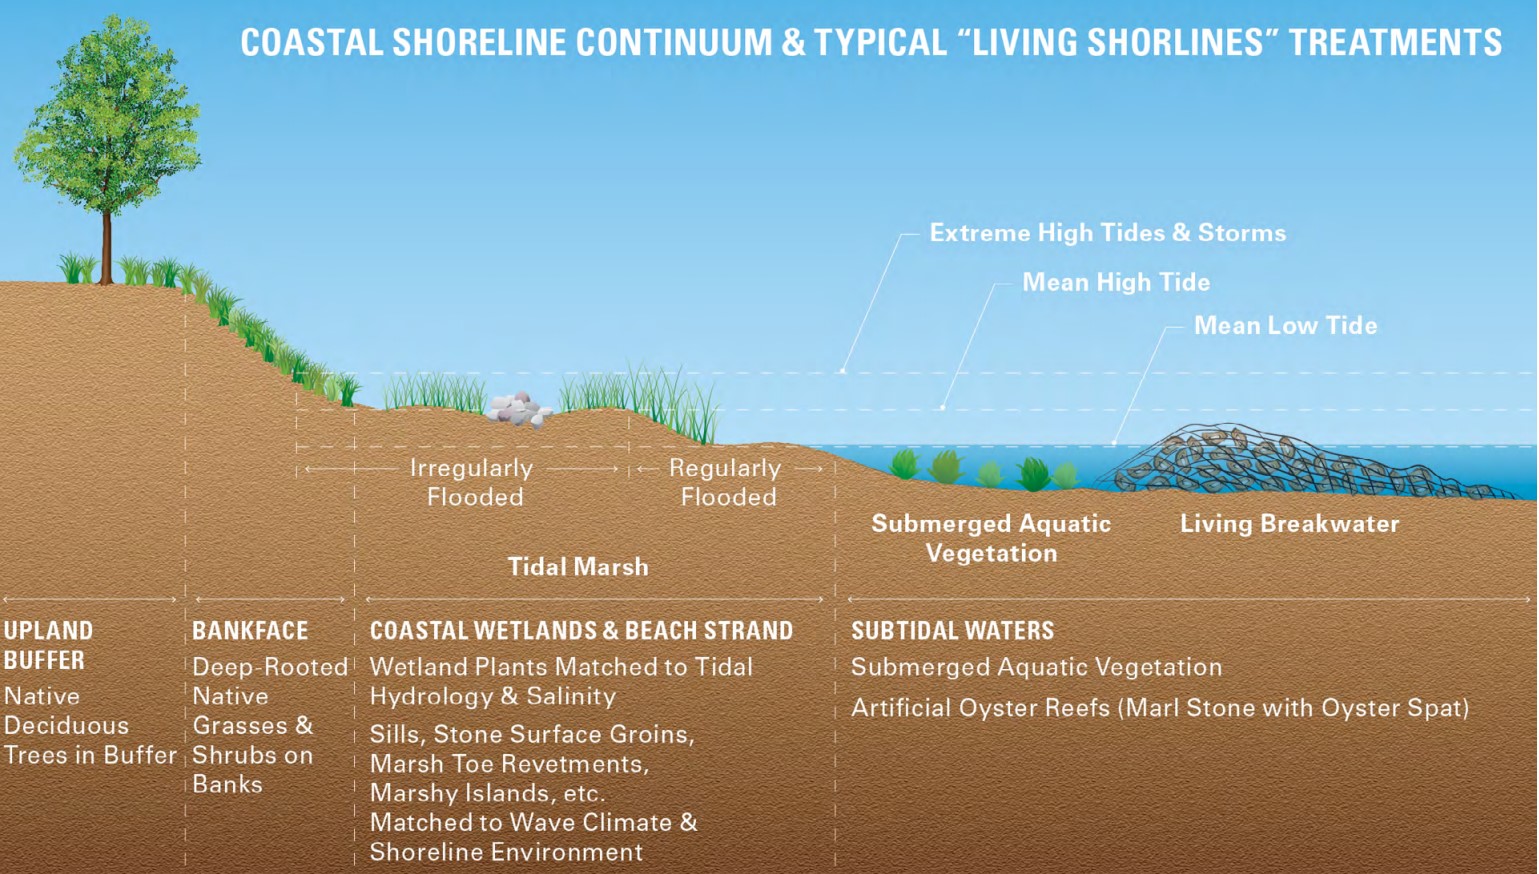 Erosion Control for Slopes, Stream Banks, and Dunes | Building America ...